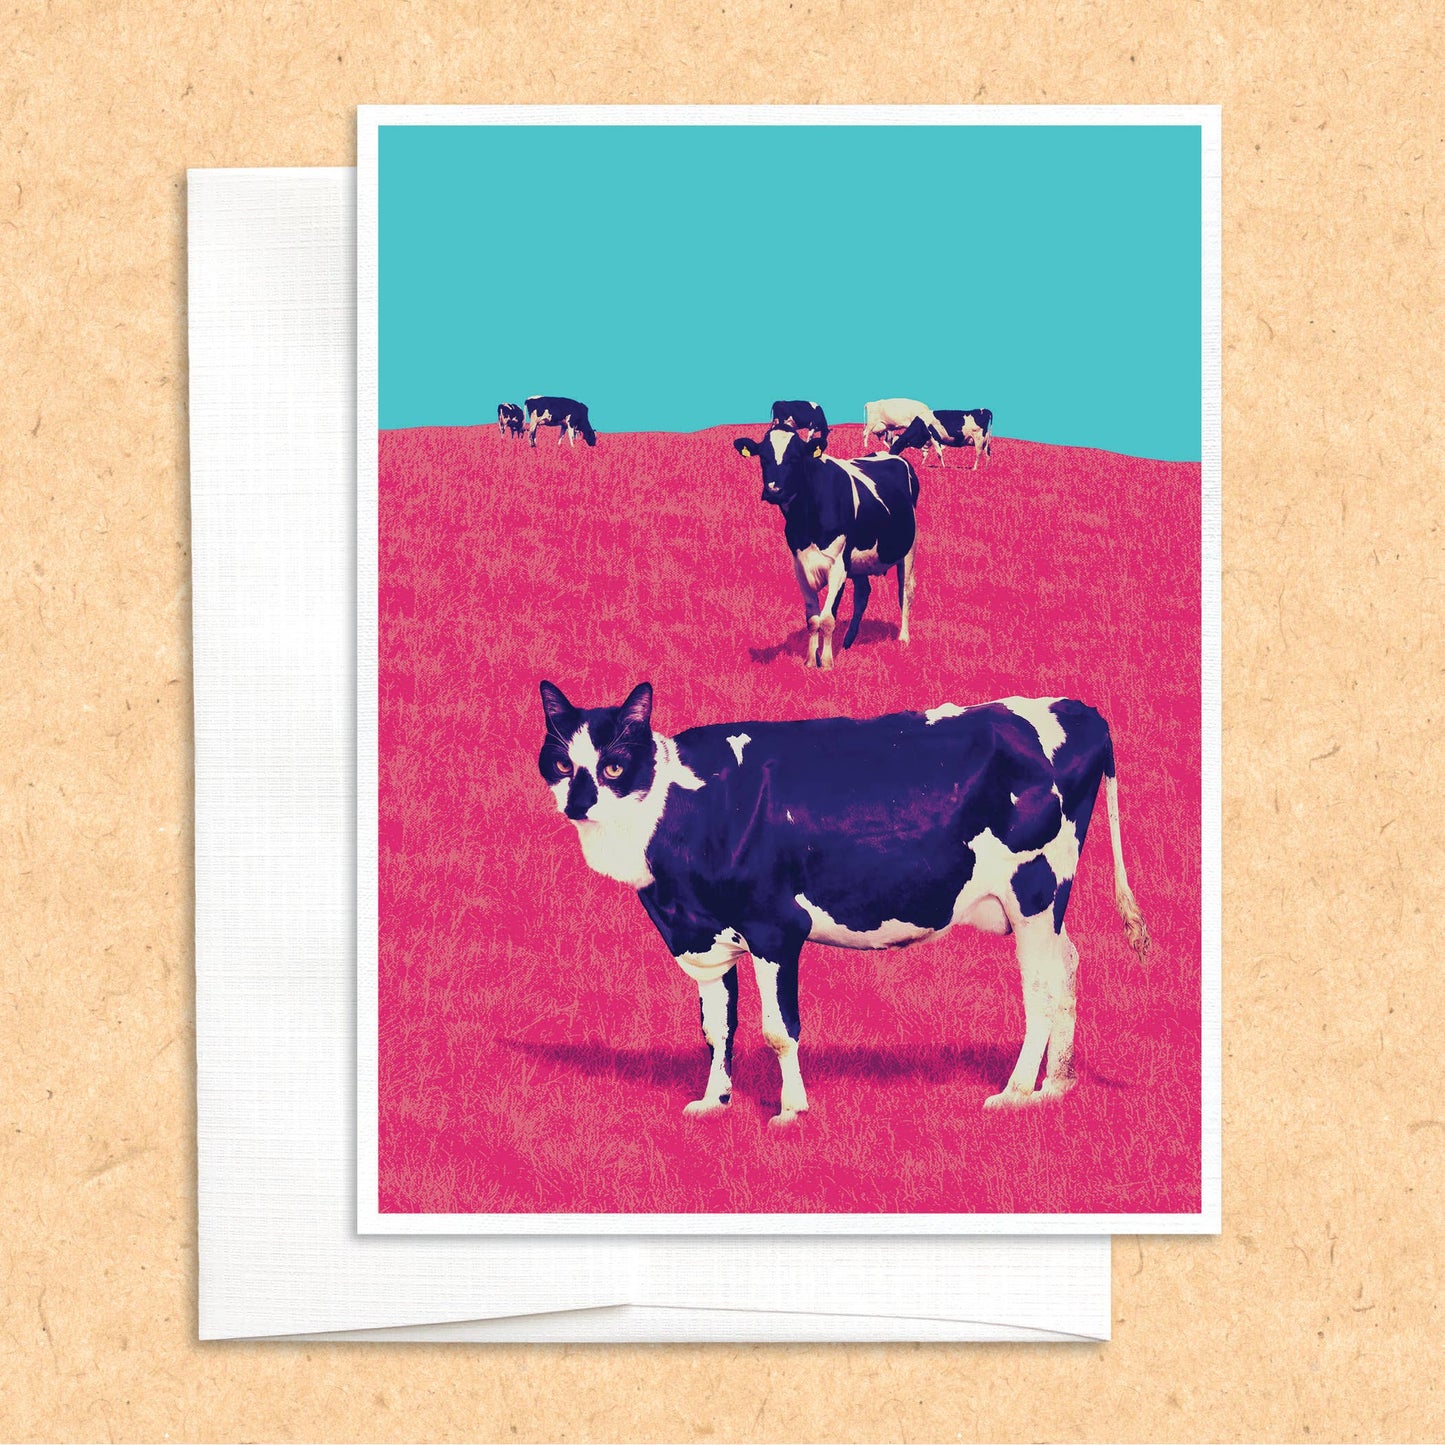 Cat Cow funny quirky greeting card